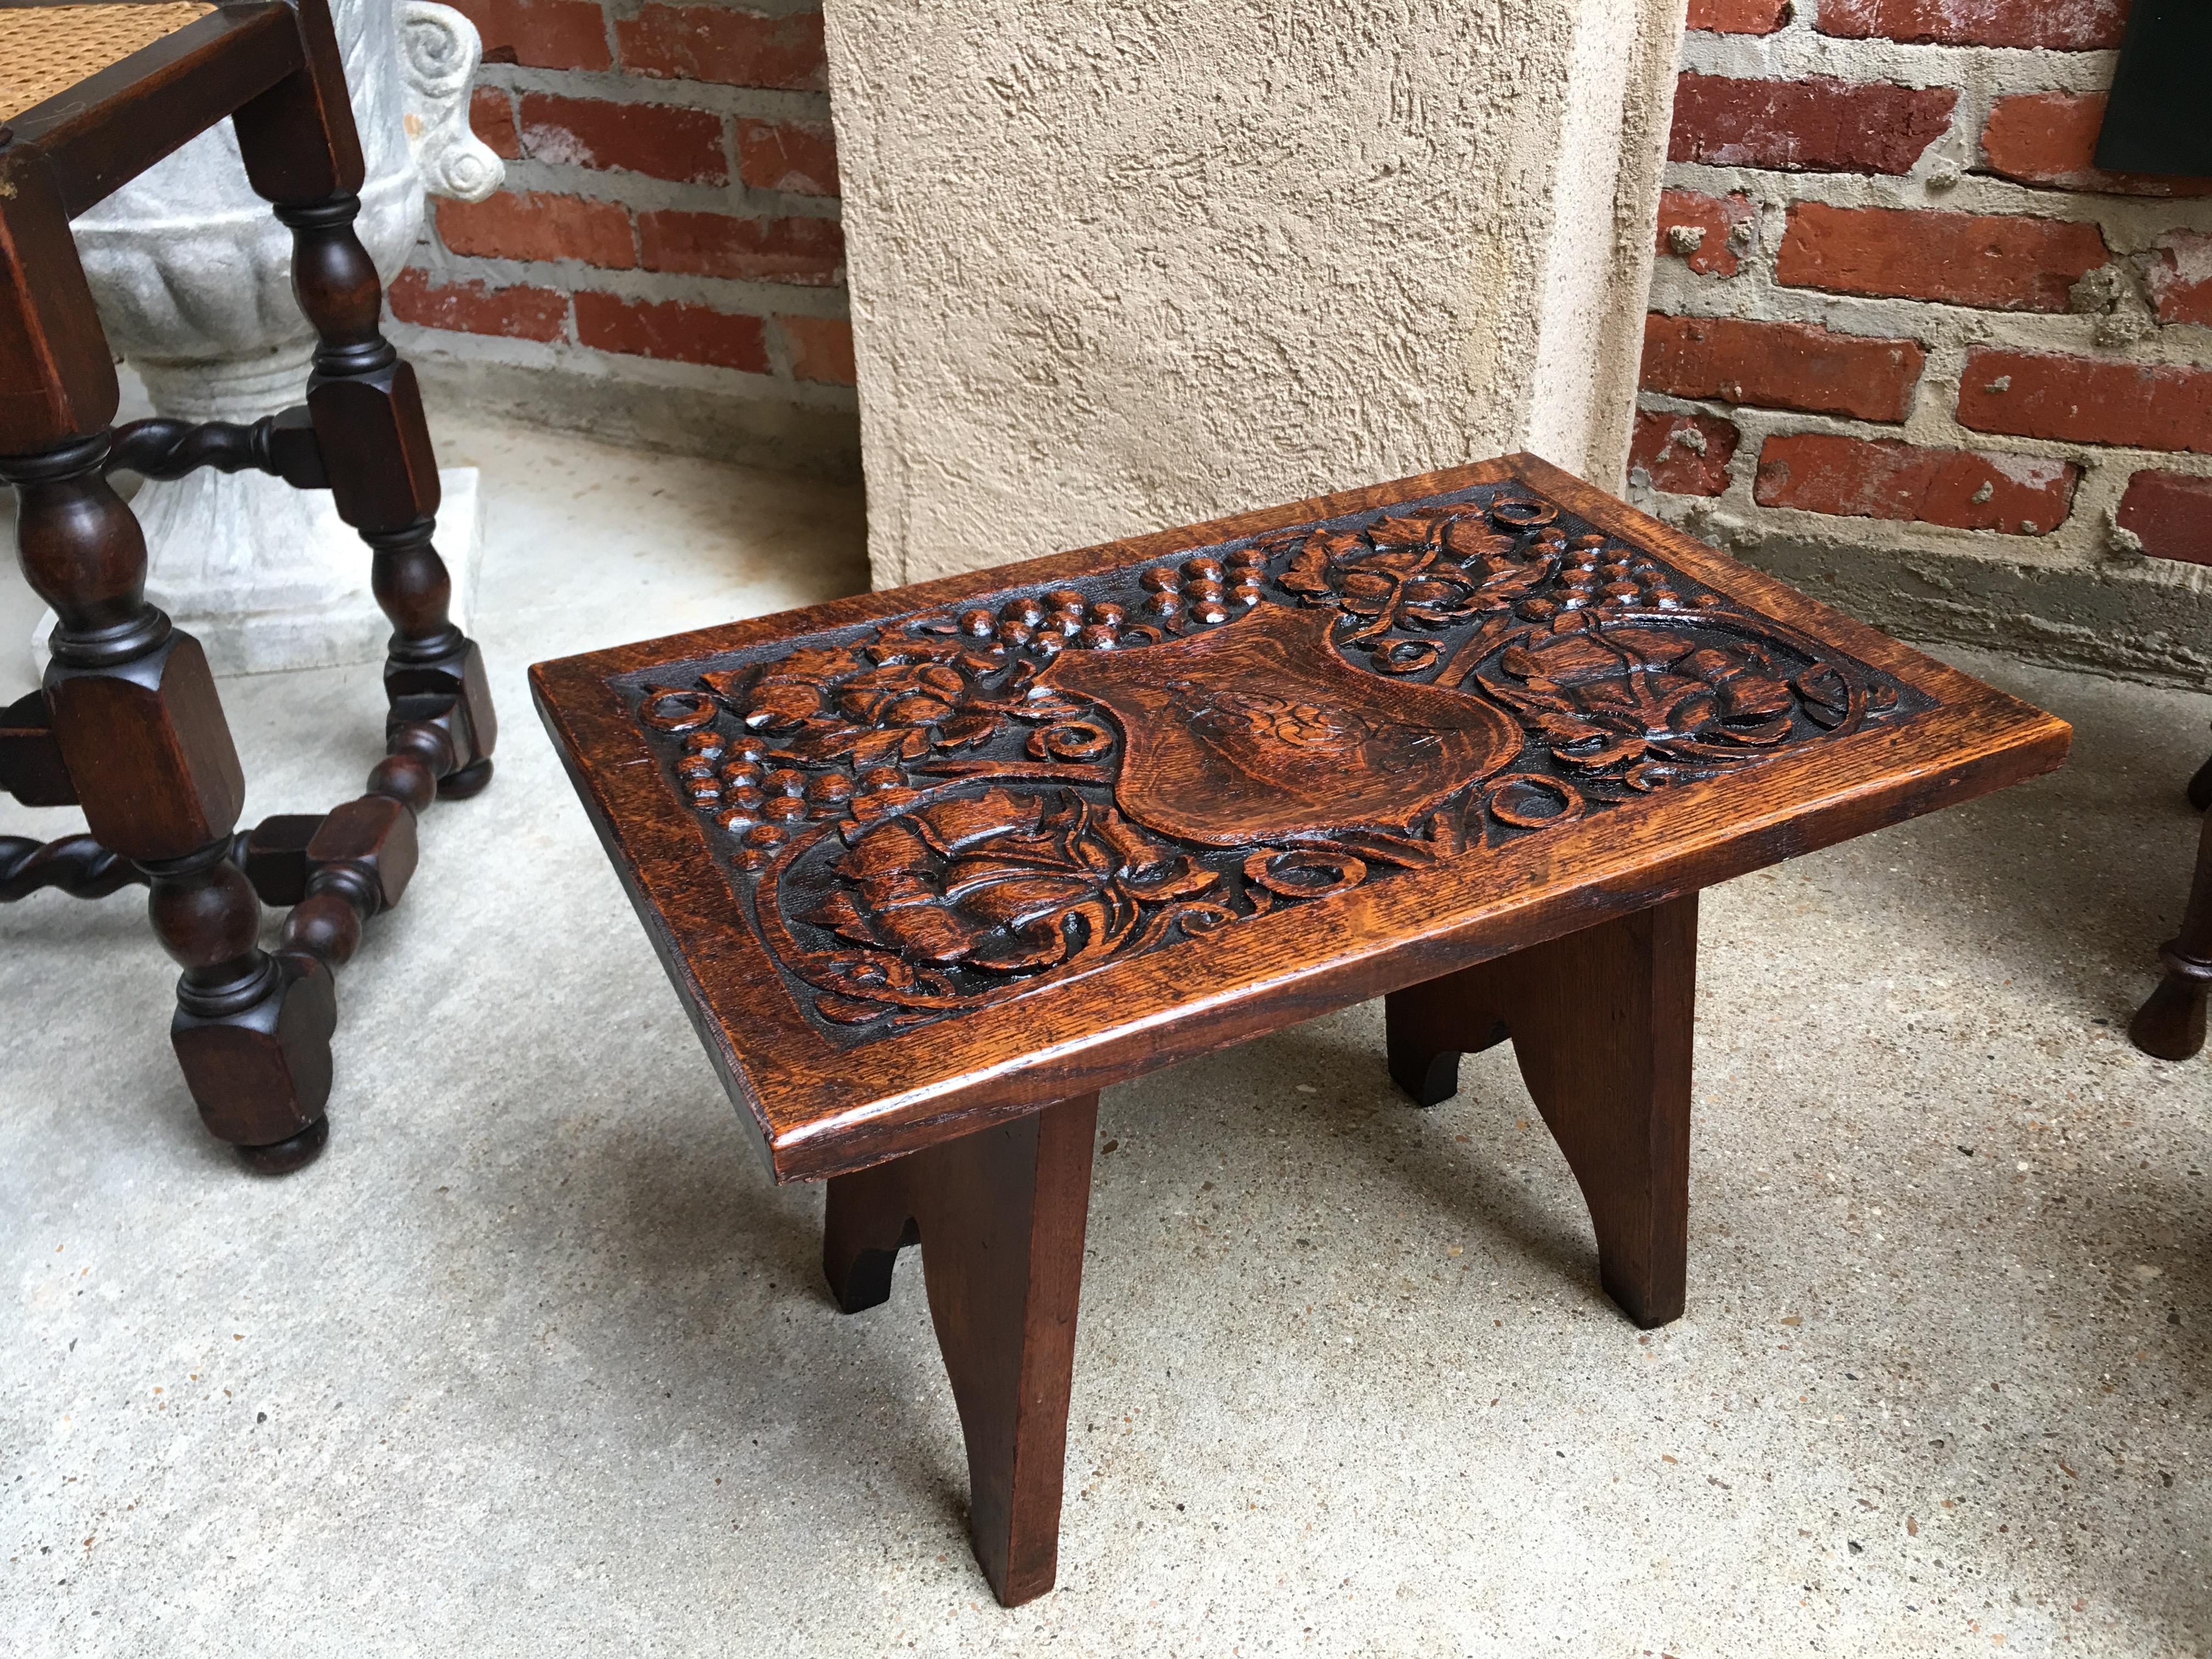 Direct from England, from the antique fairs near London, one of several outstanding small carved oak antique footstools/tables from our last buying trip. It is Such a Challenge to find the smaller accent pieces like this, we are very excited to have